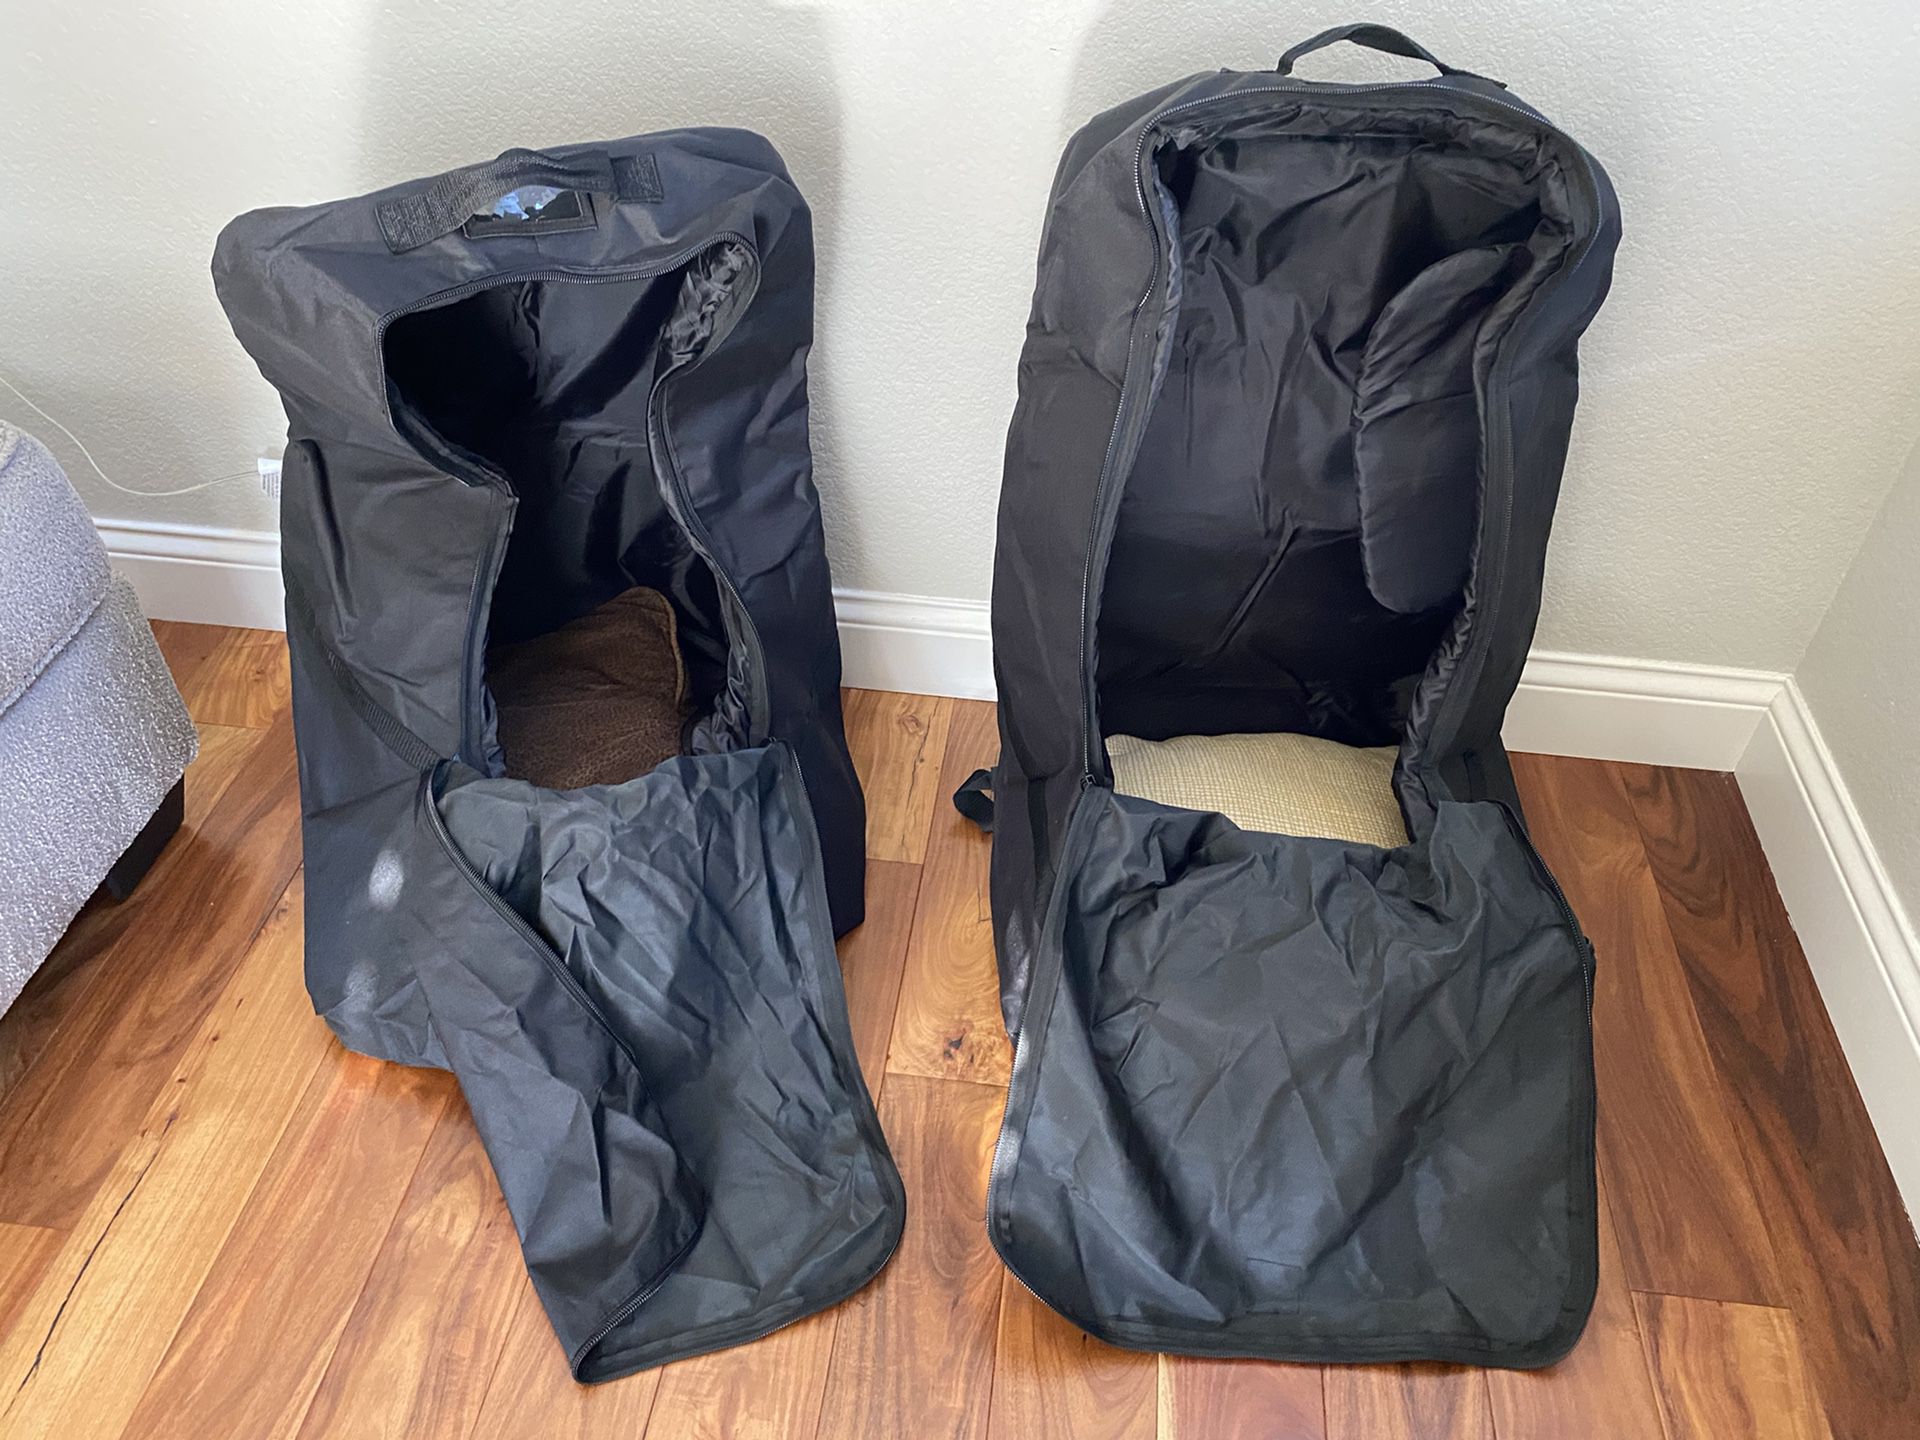 Car Seat Travel Bags-Backpack Style